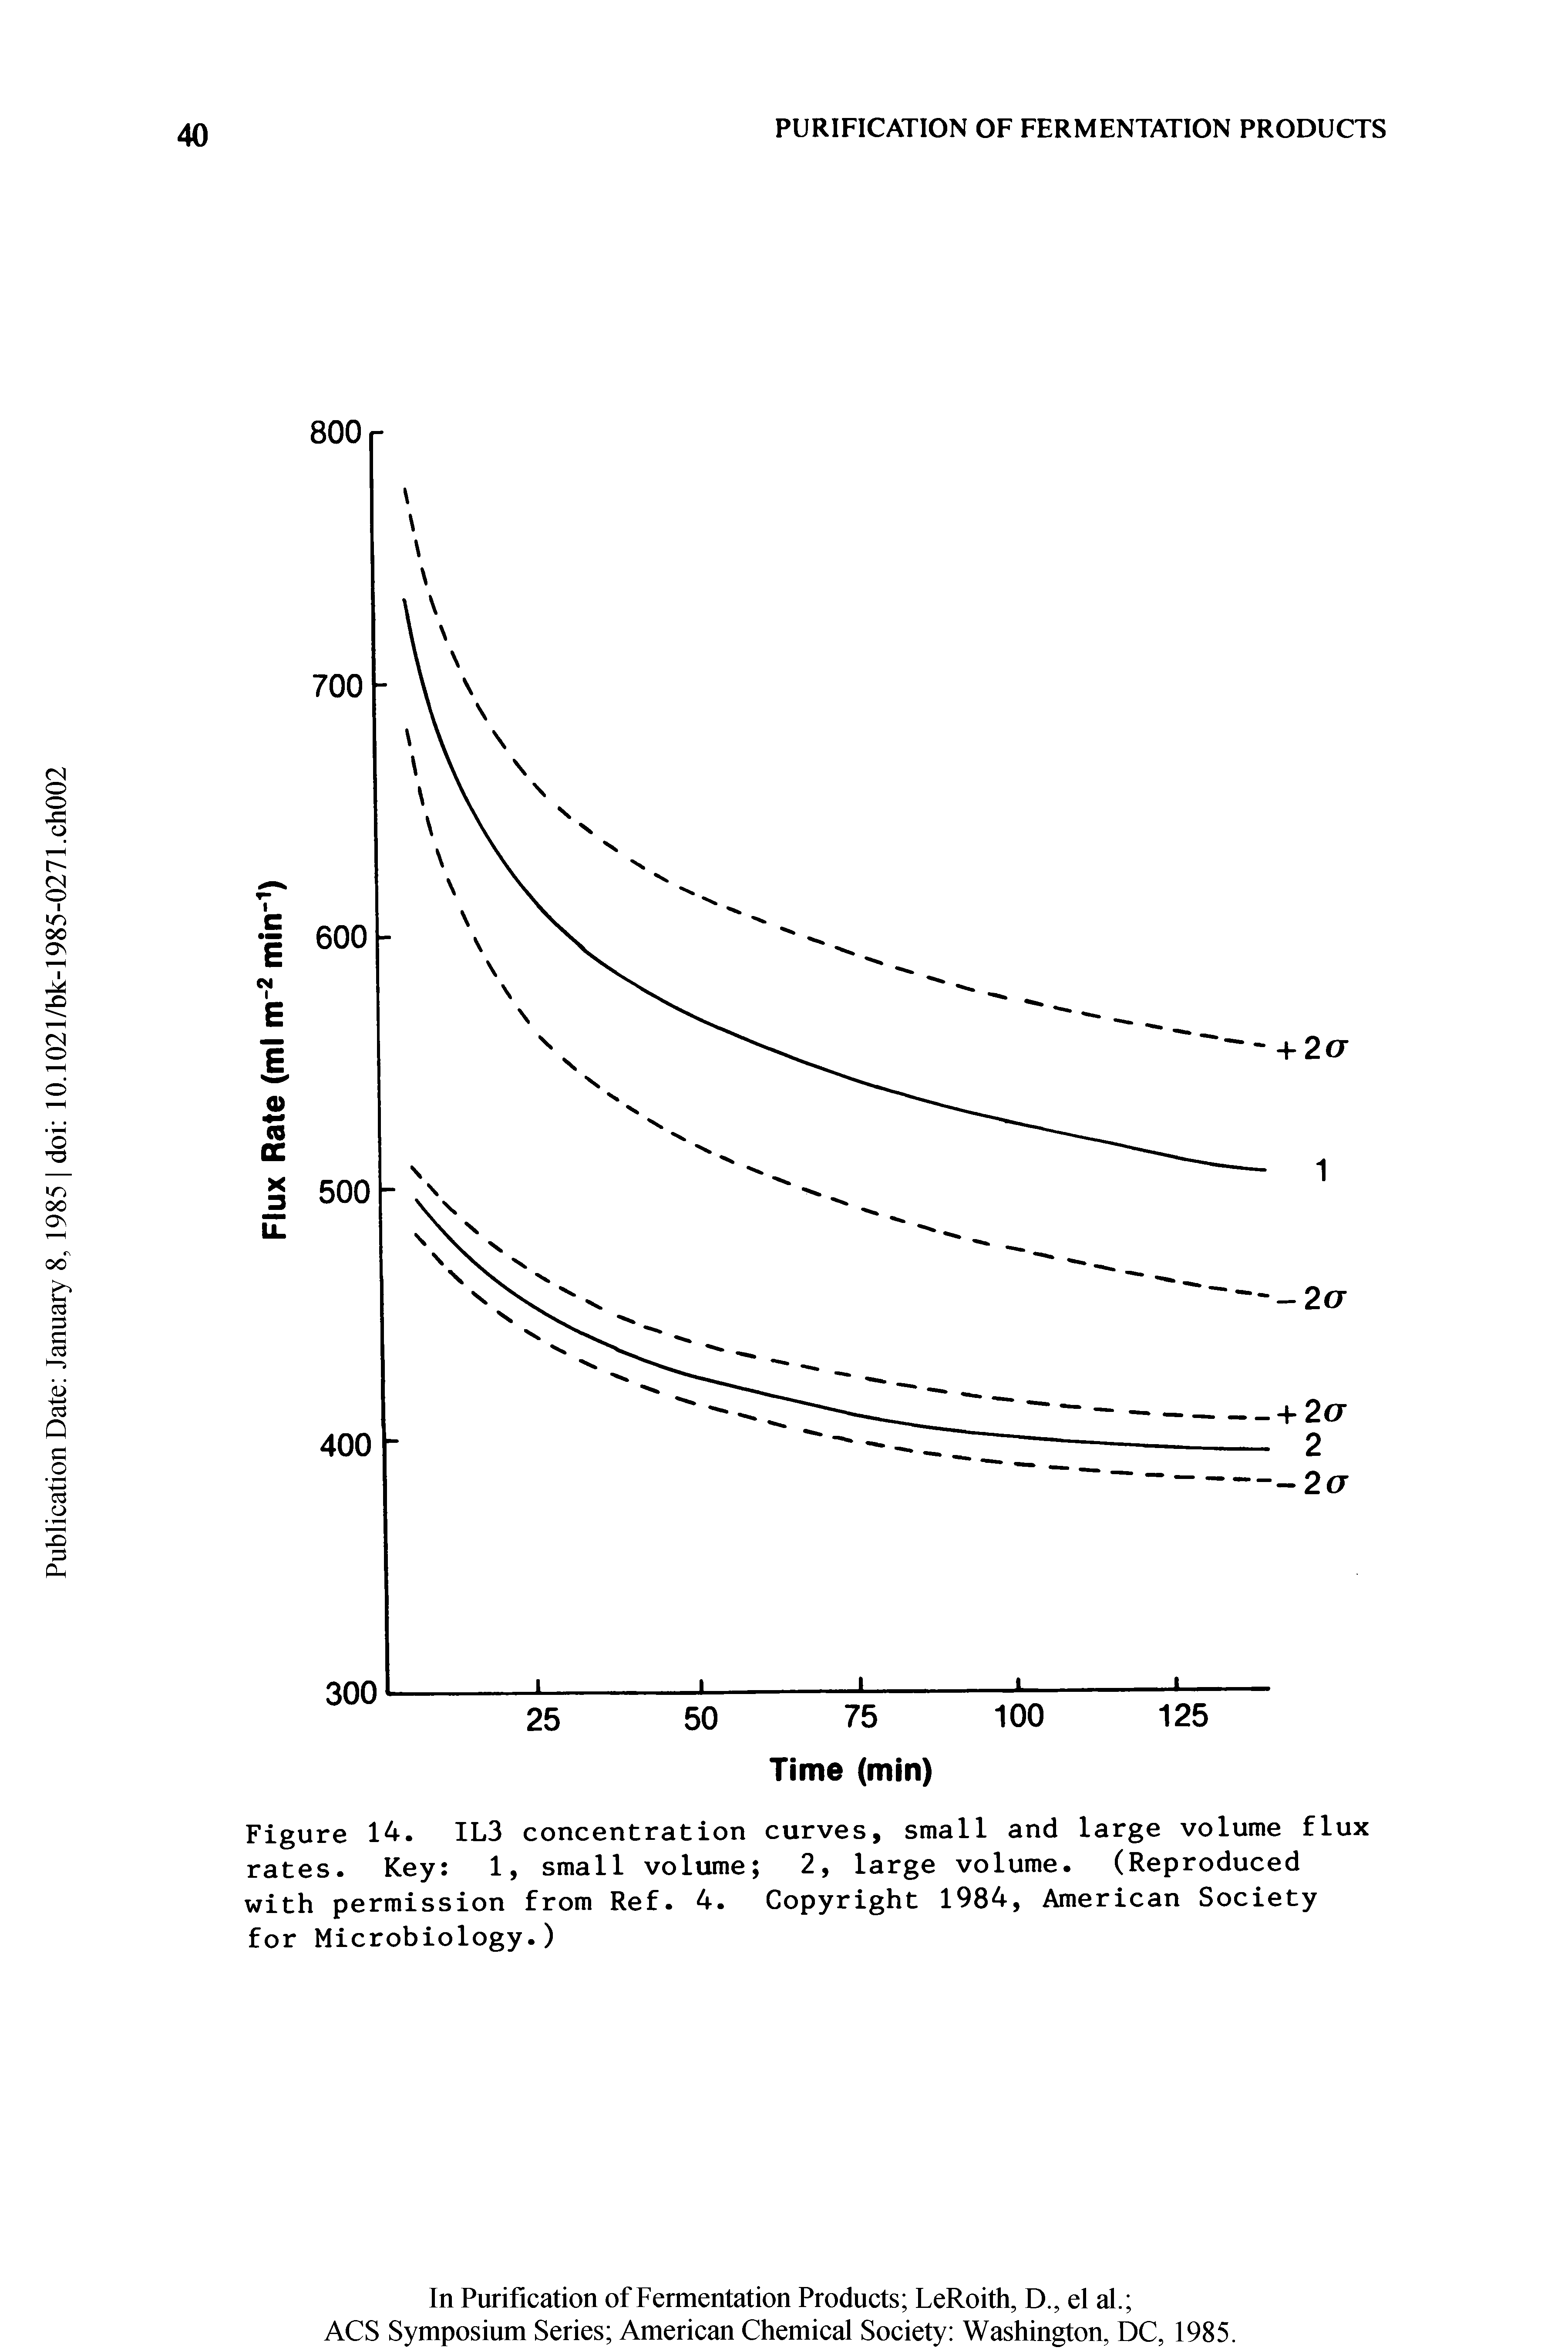 Figure 14. IL3 concentration curves, small and large volume flux rates. Key 1, small volume 2, large volume. (Reproduced with permission from Ref. 4. Copyright 1984, American Society for Microbiology.)...